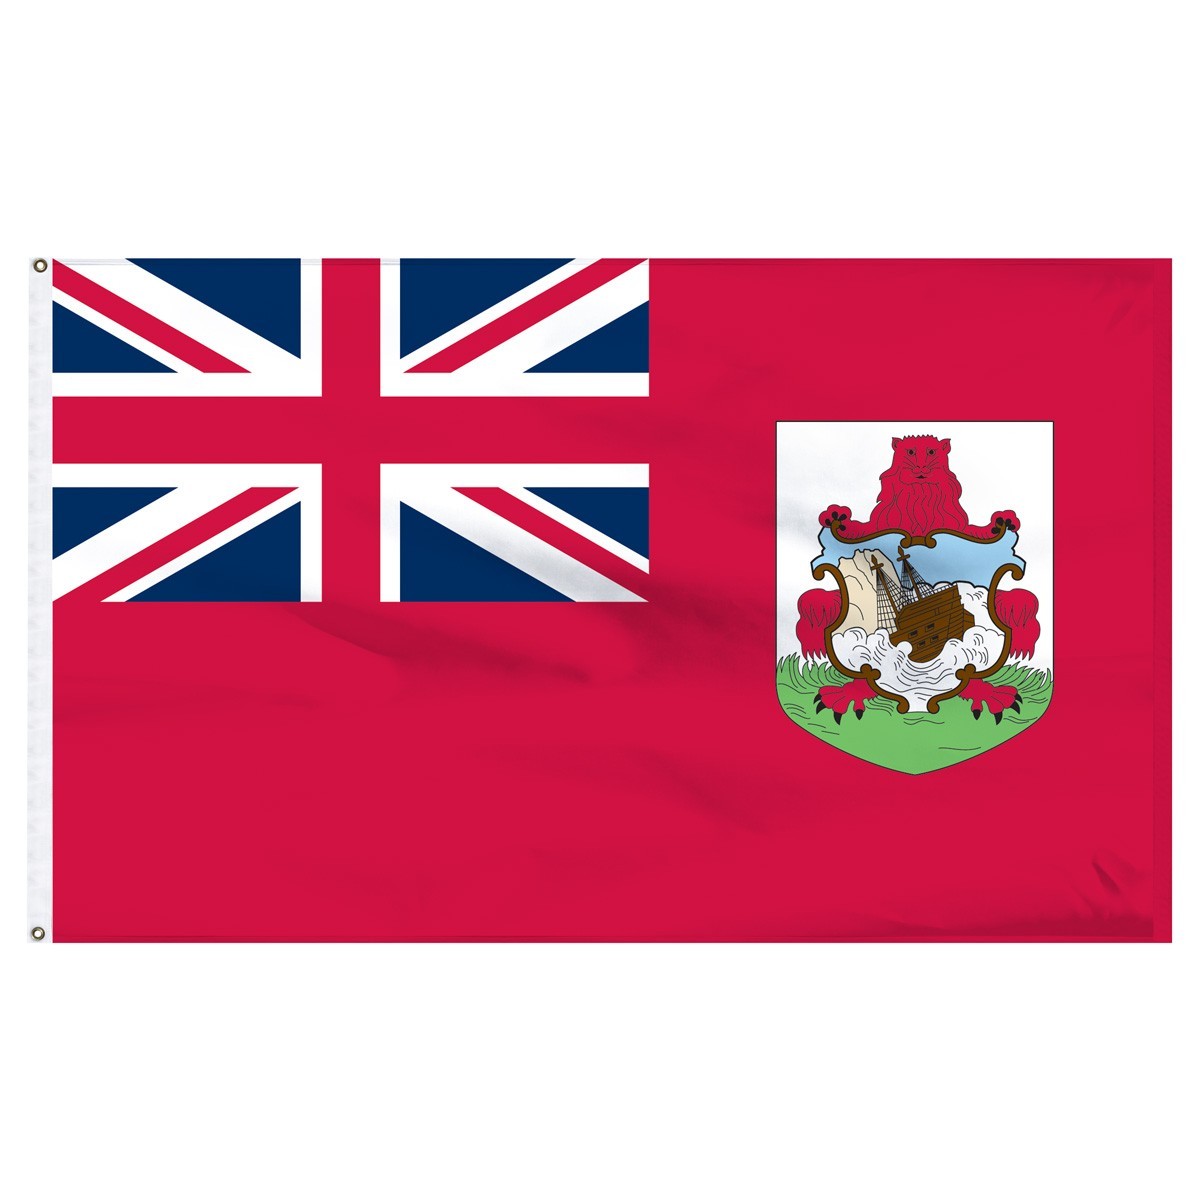 Bermuda world flags for sale high quality online